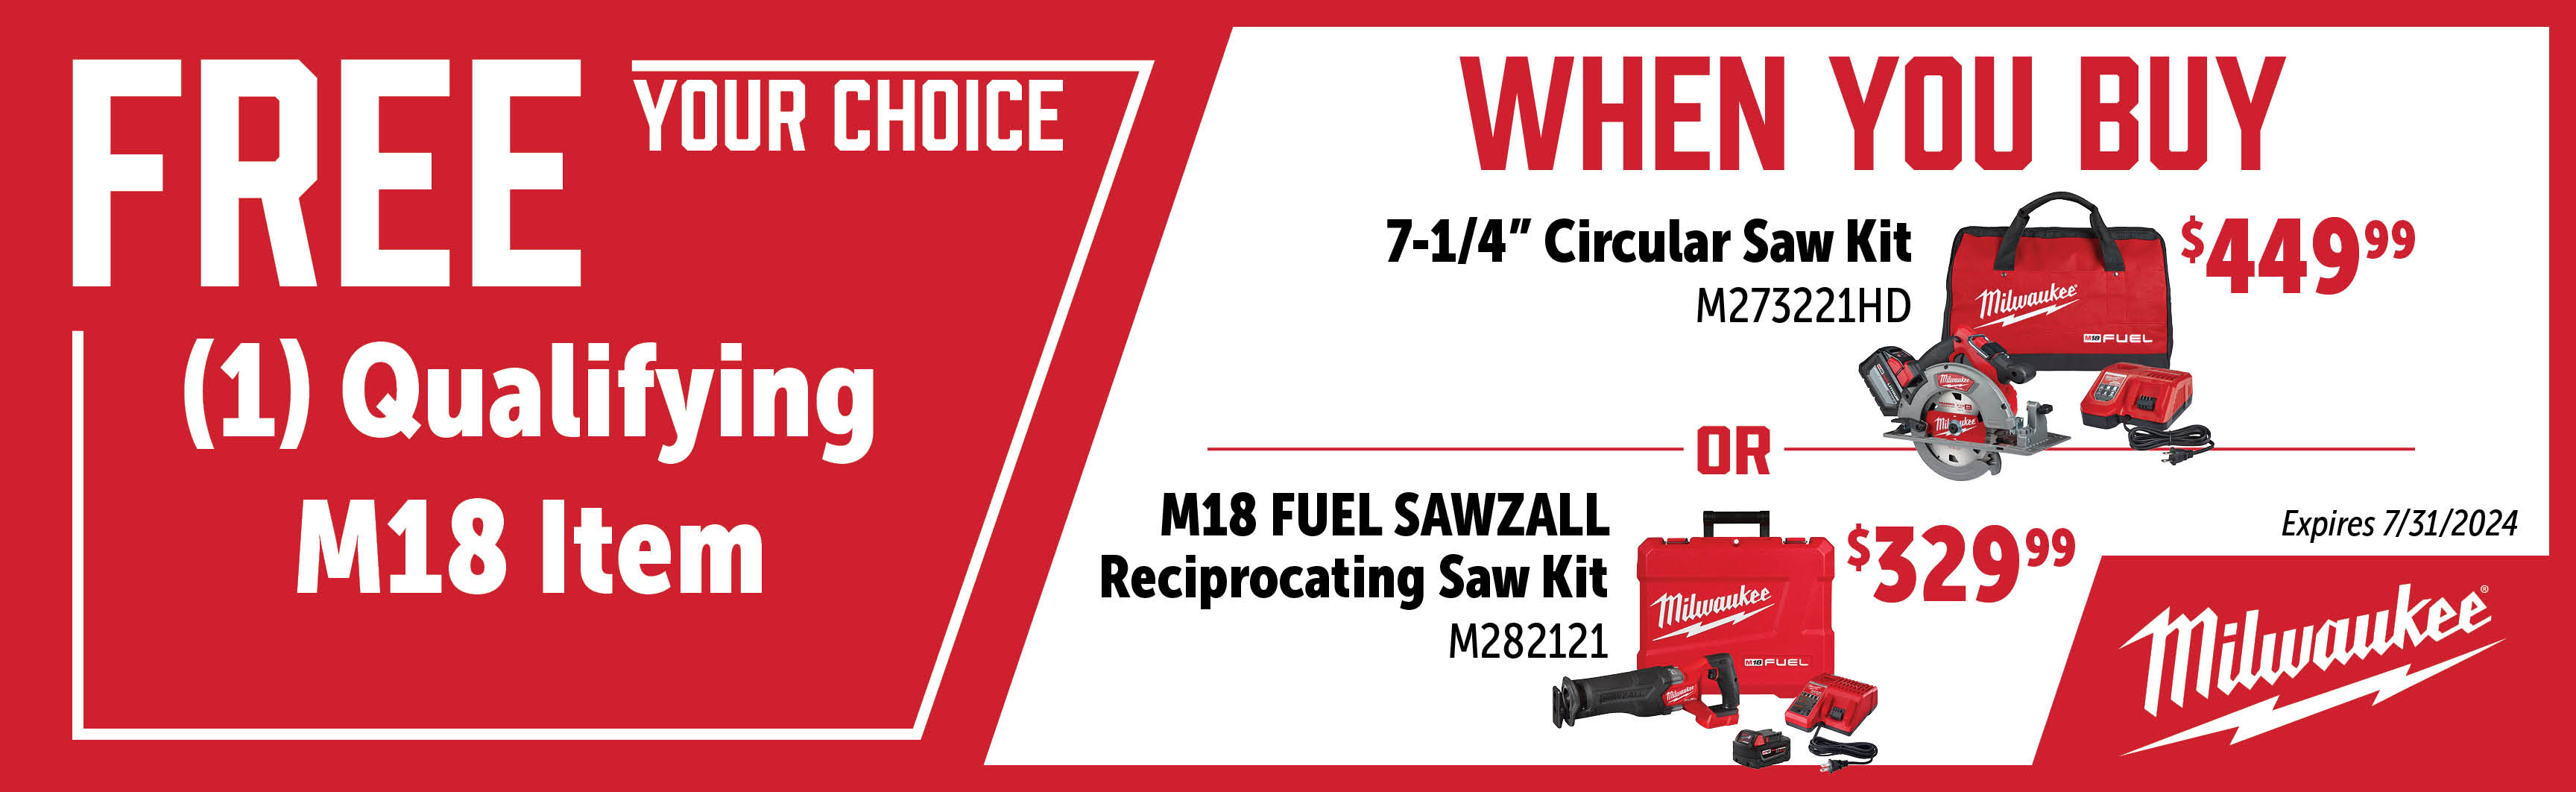 Milwaukee May - July: Buy a M273221HD or M282121 and Get a Free Qualifying M18 Item